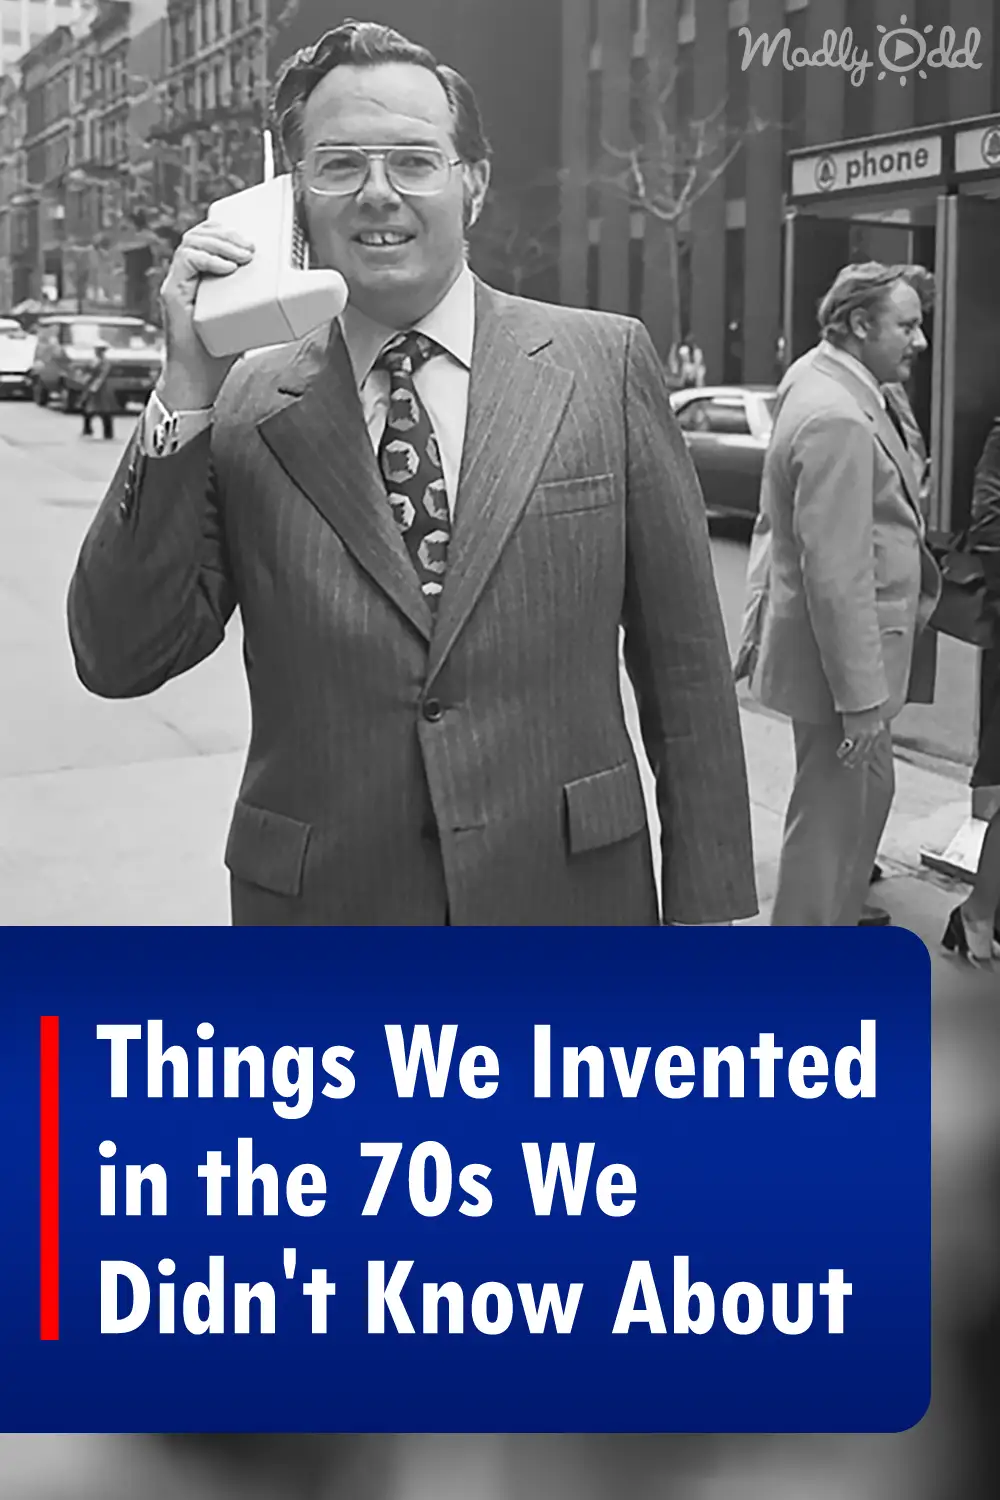 Things We Invented in the 70s We Didn't Know About